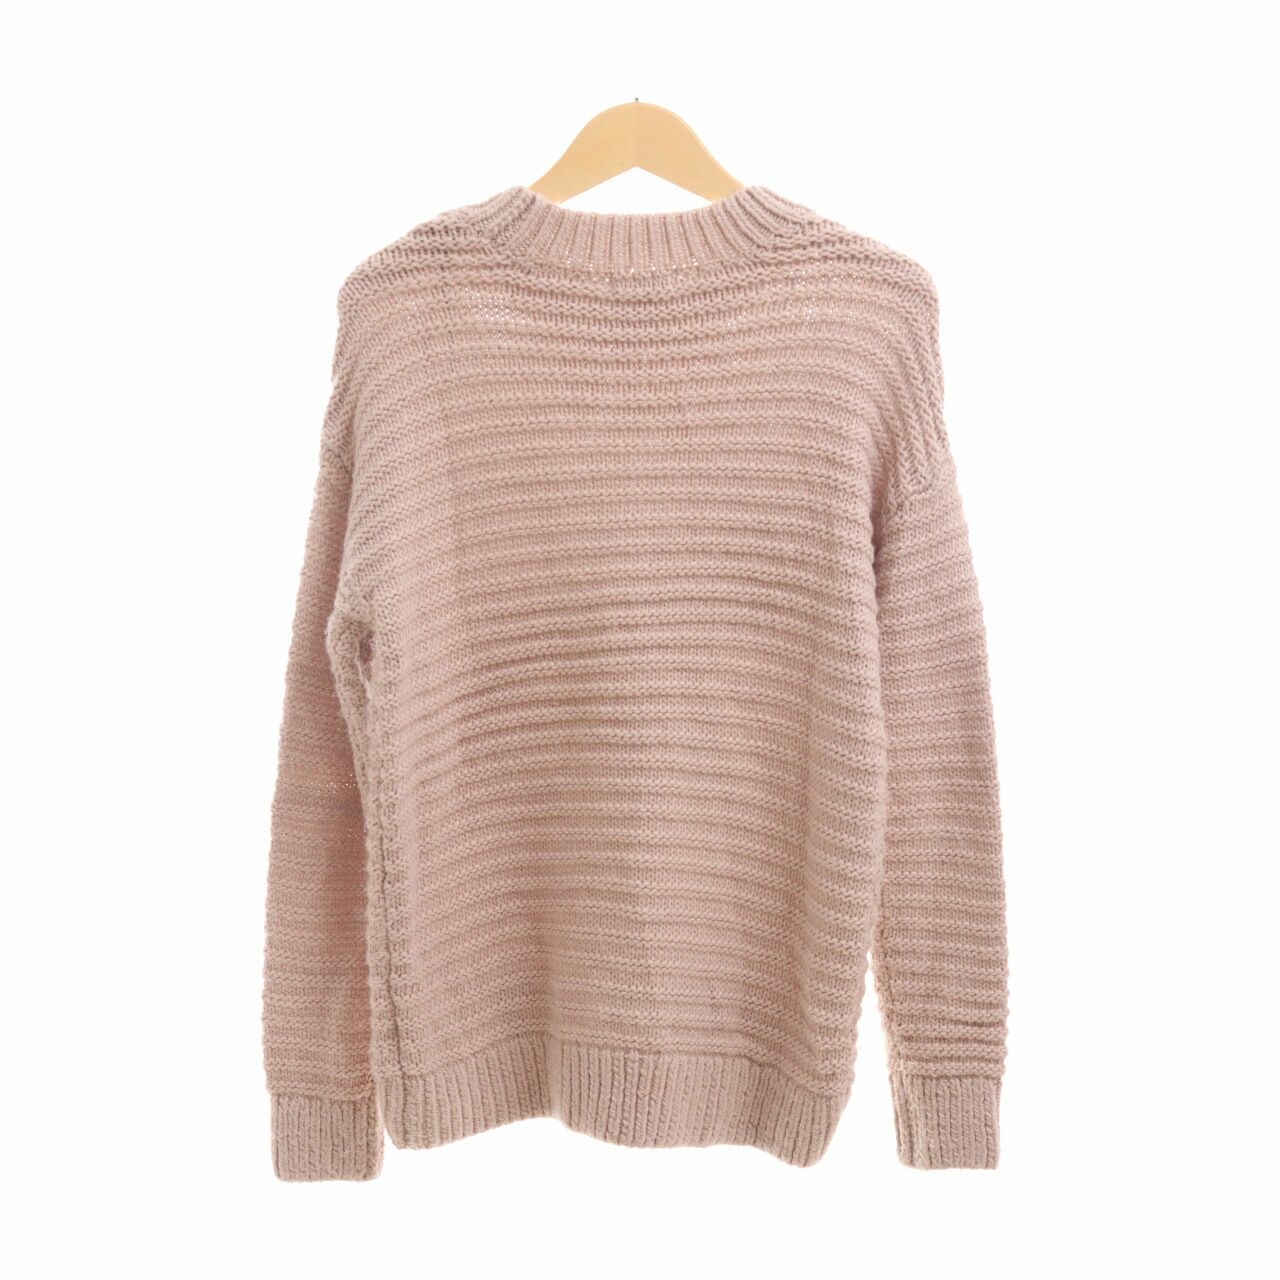 H&M Dusty Pink Knit Sweater